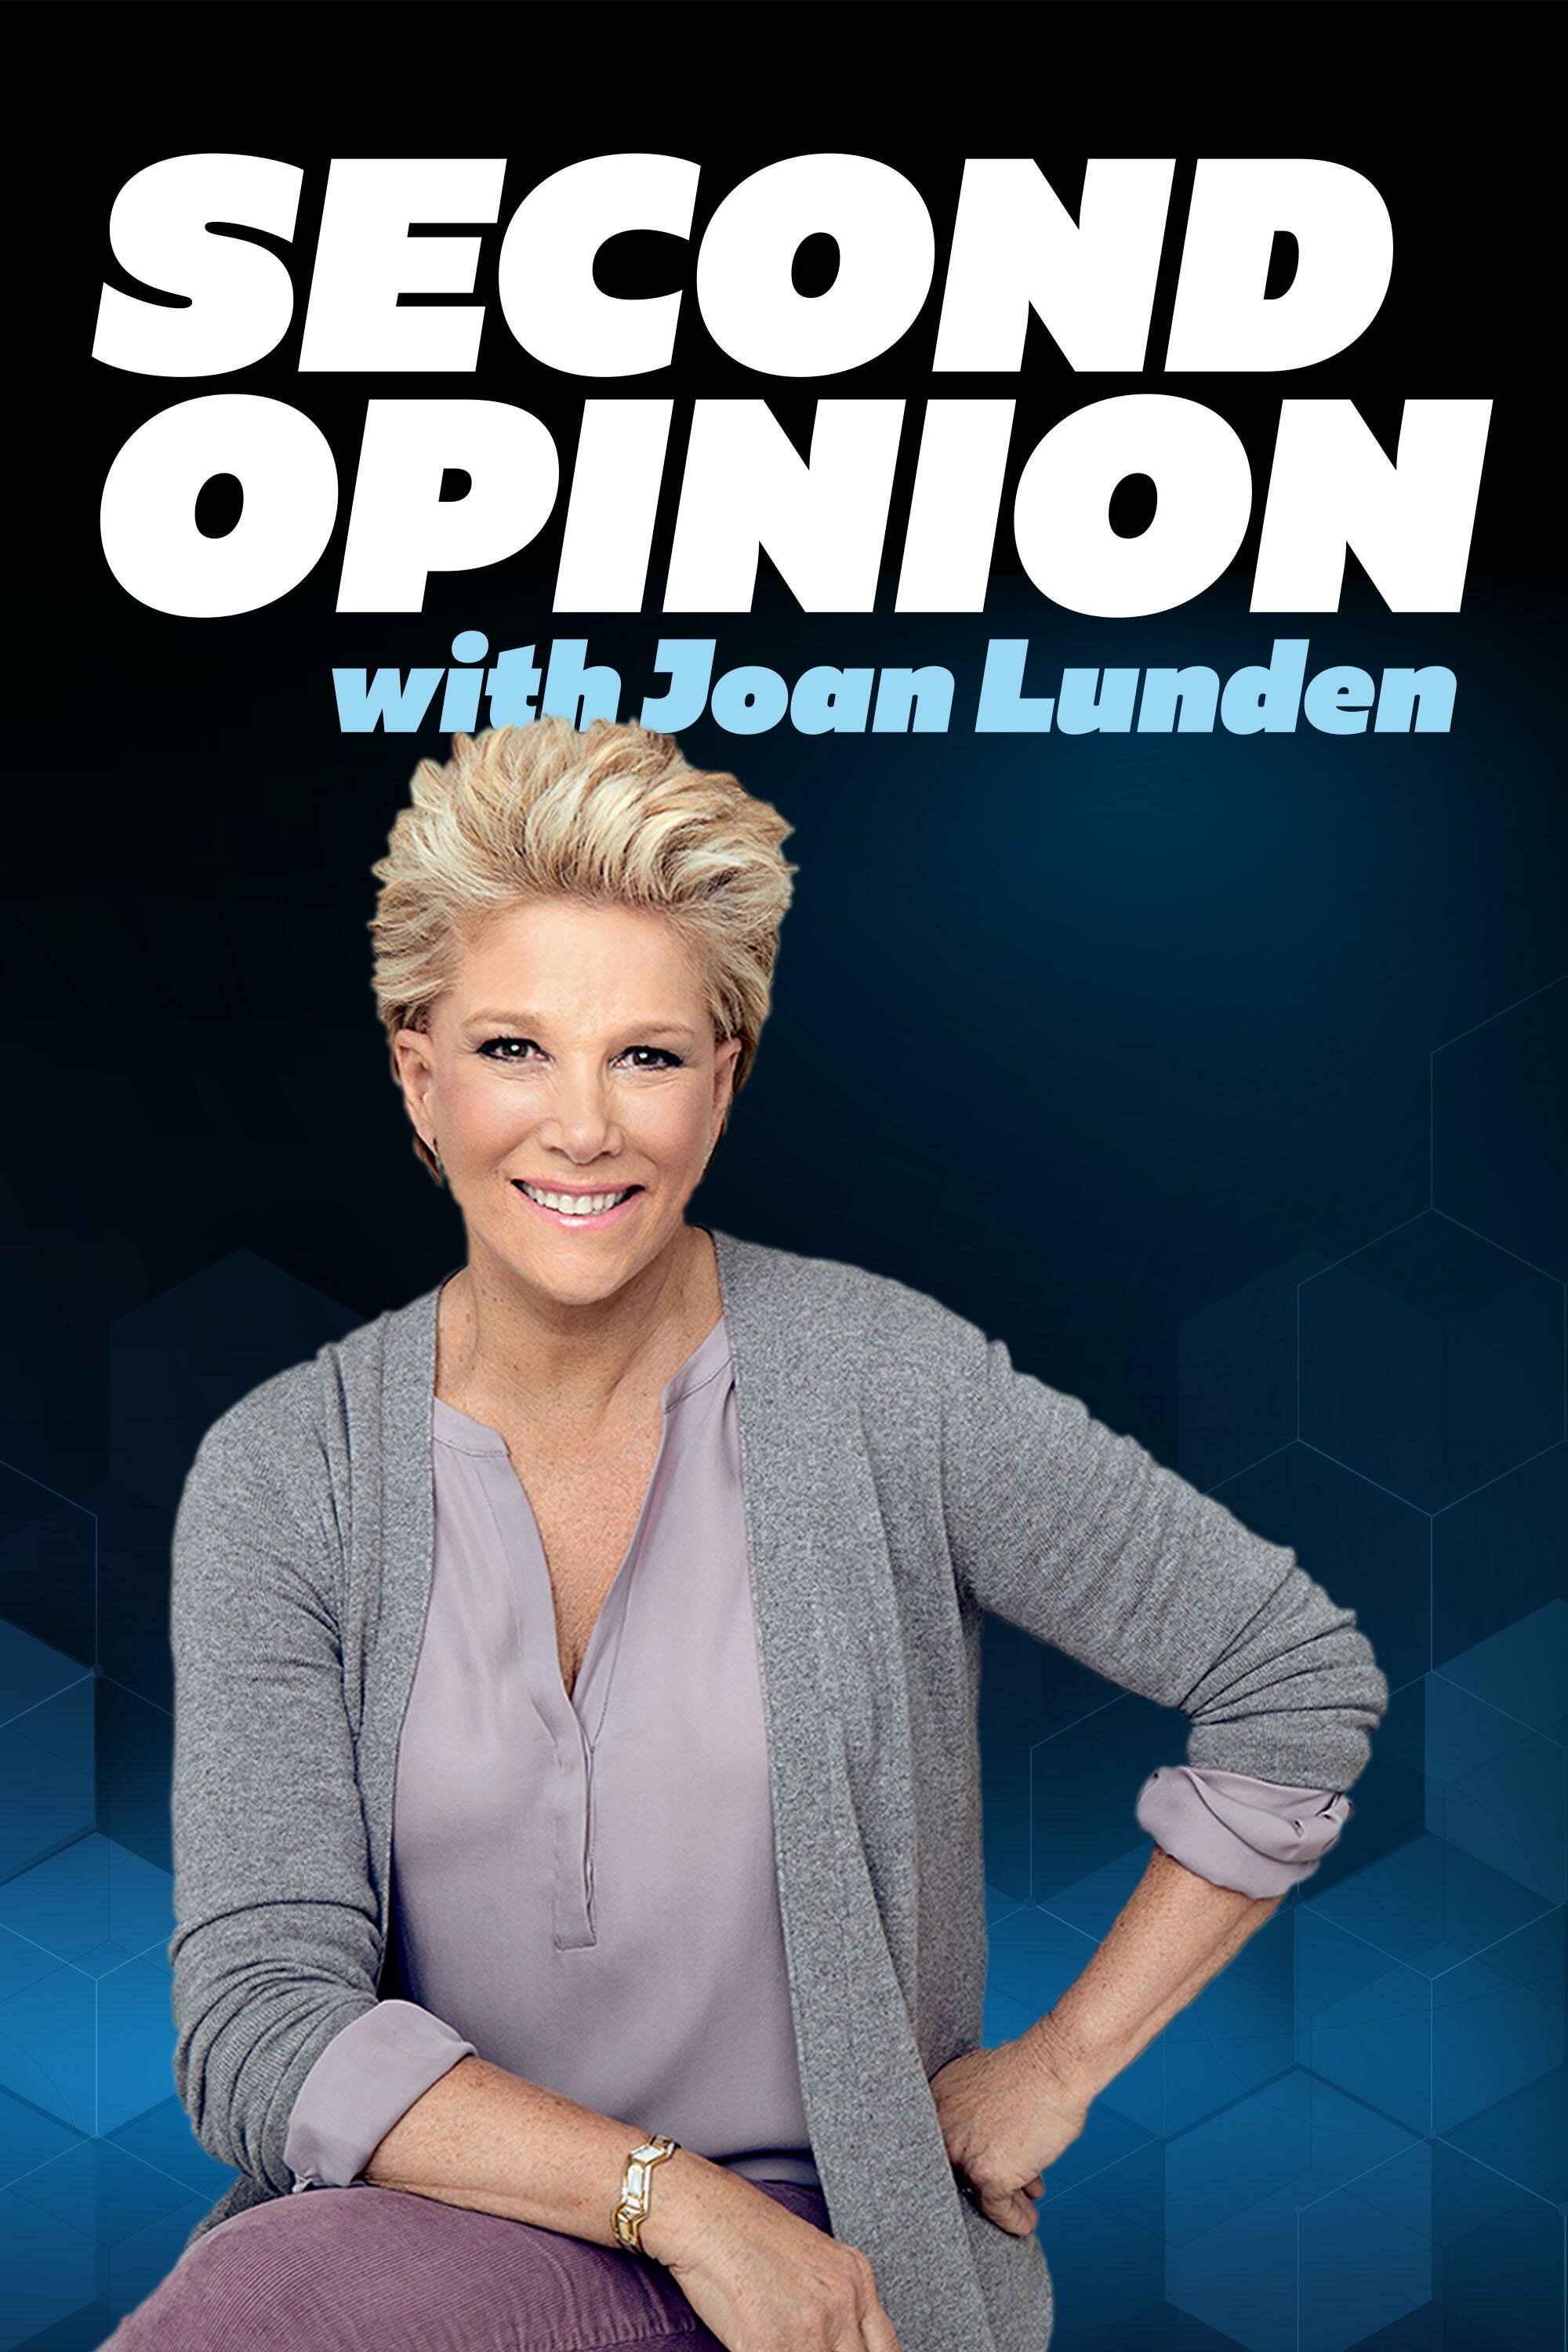 Second Opinion with Joan Lunden ne zaman